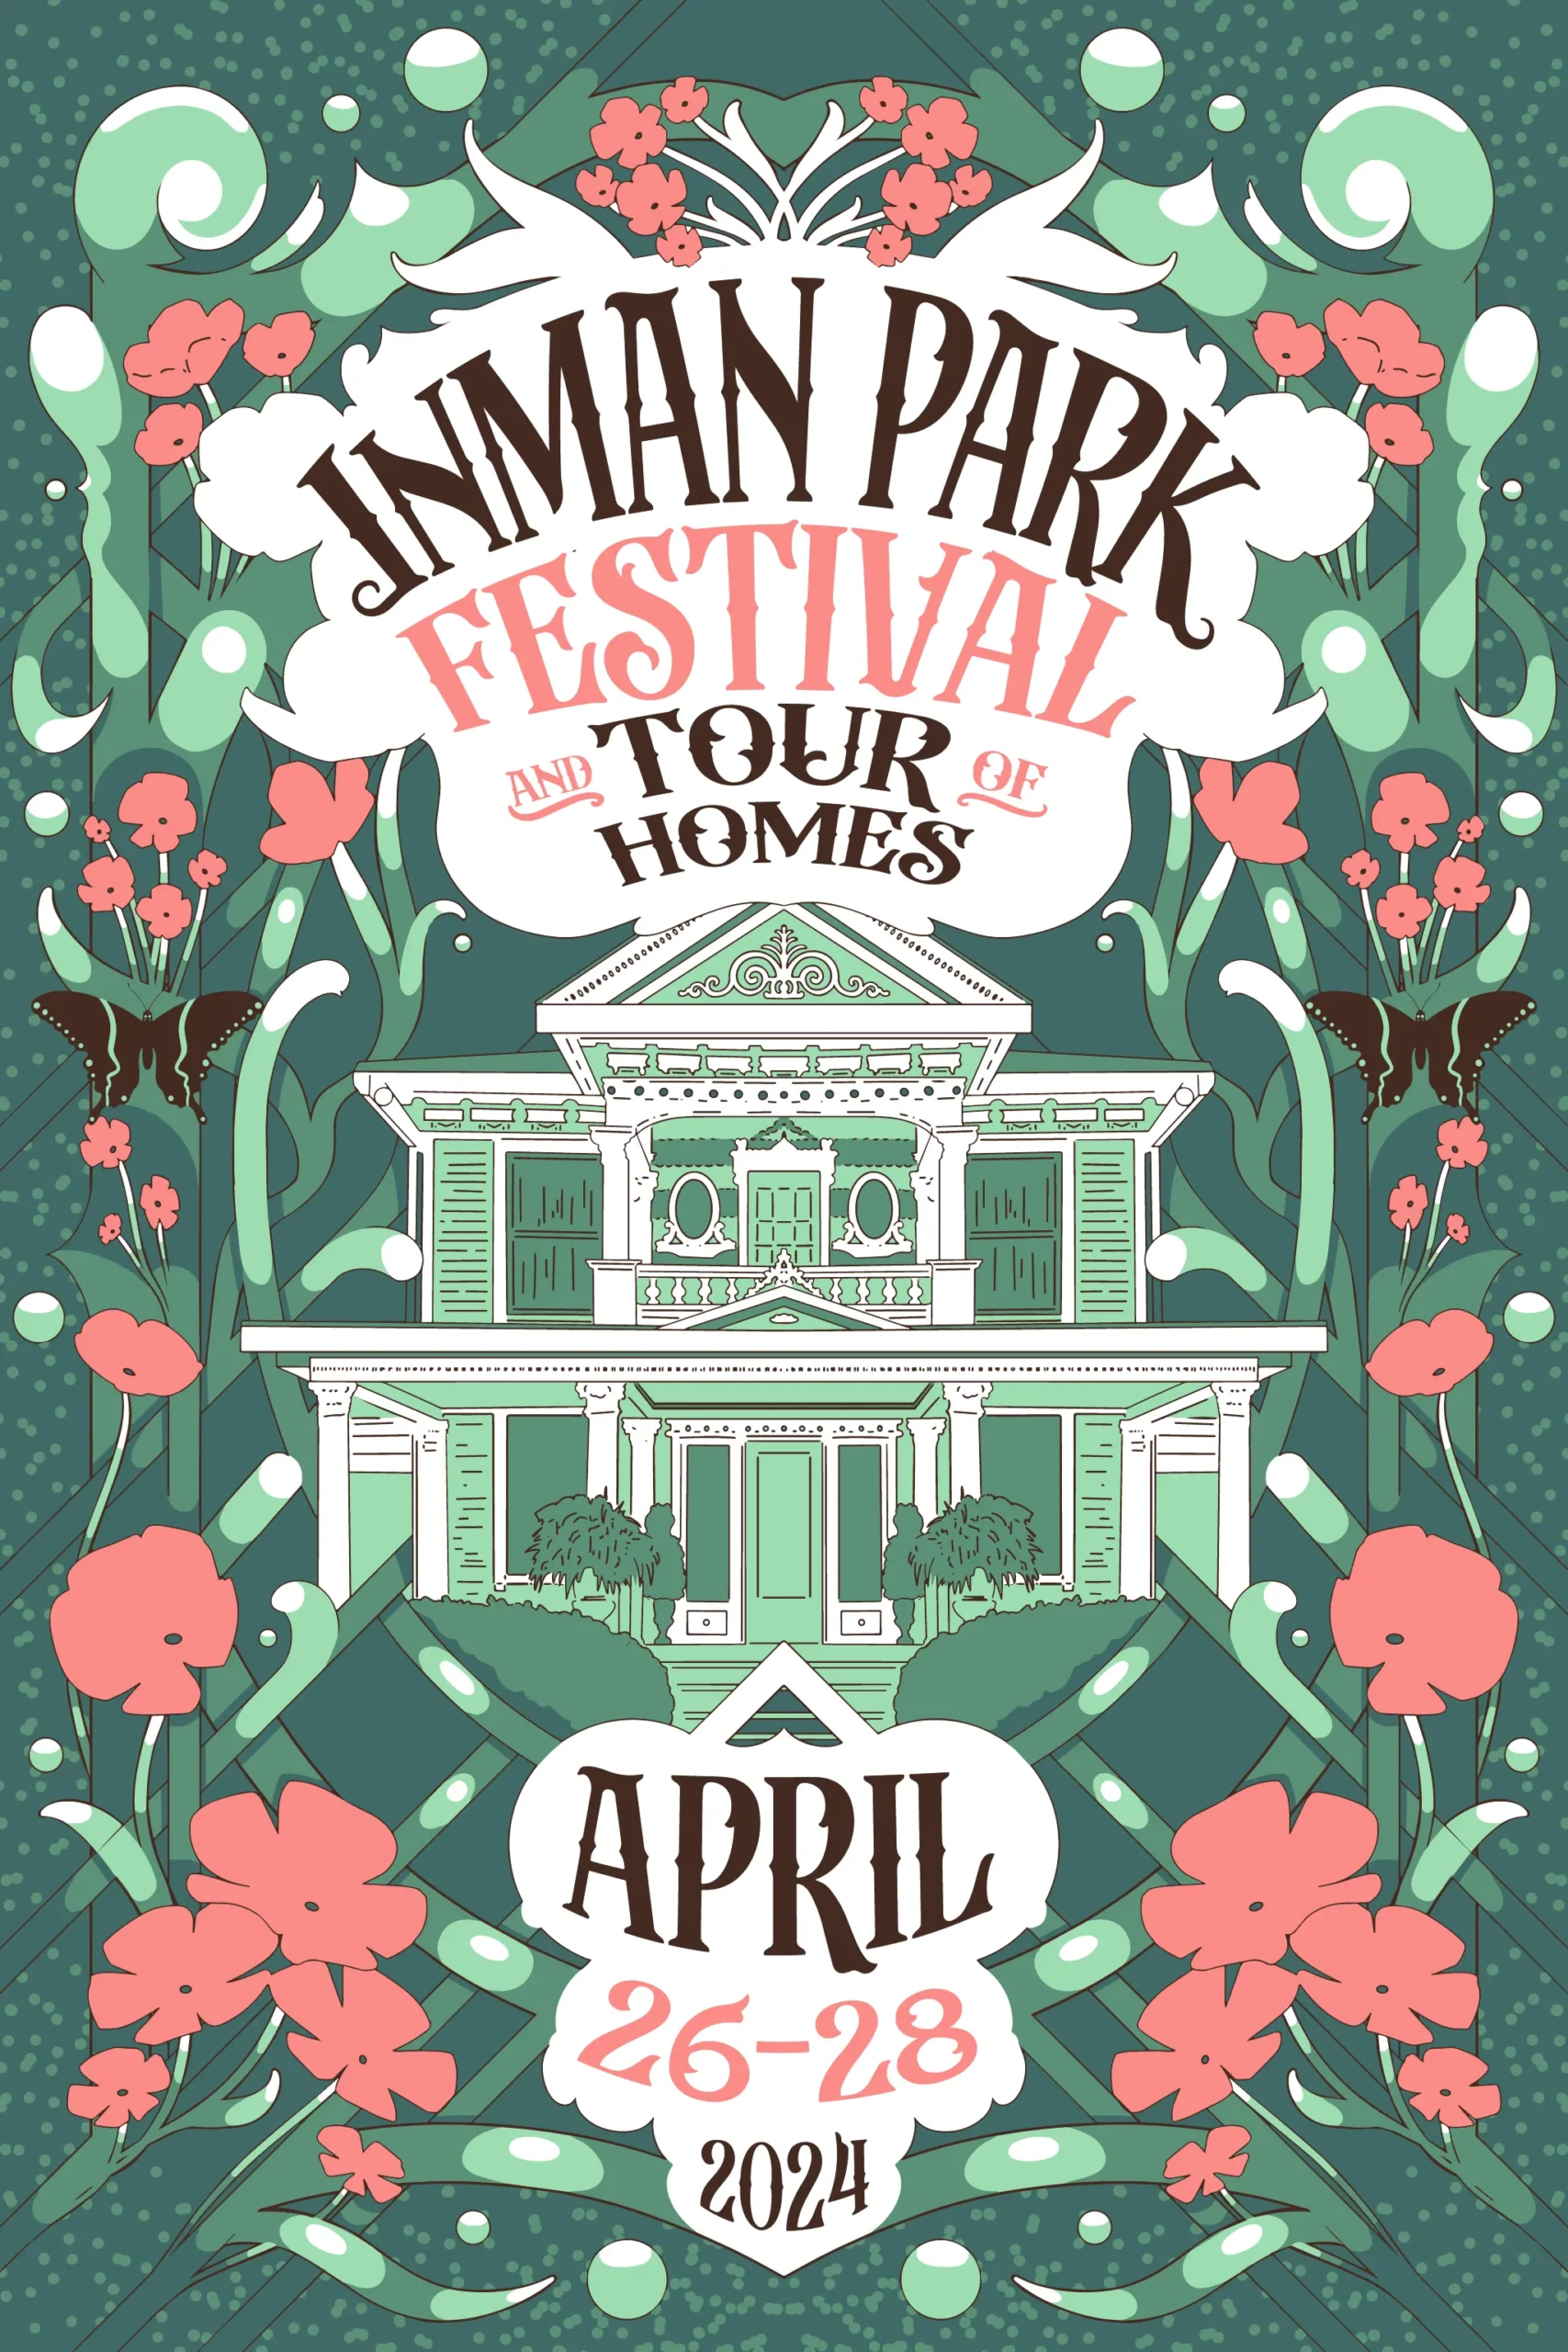 Home Inman Park Festival and Tour of Homes